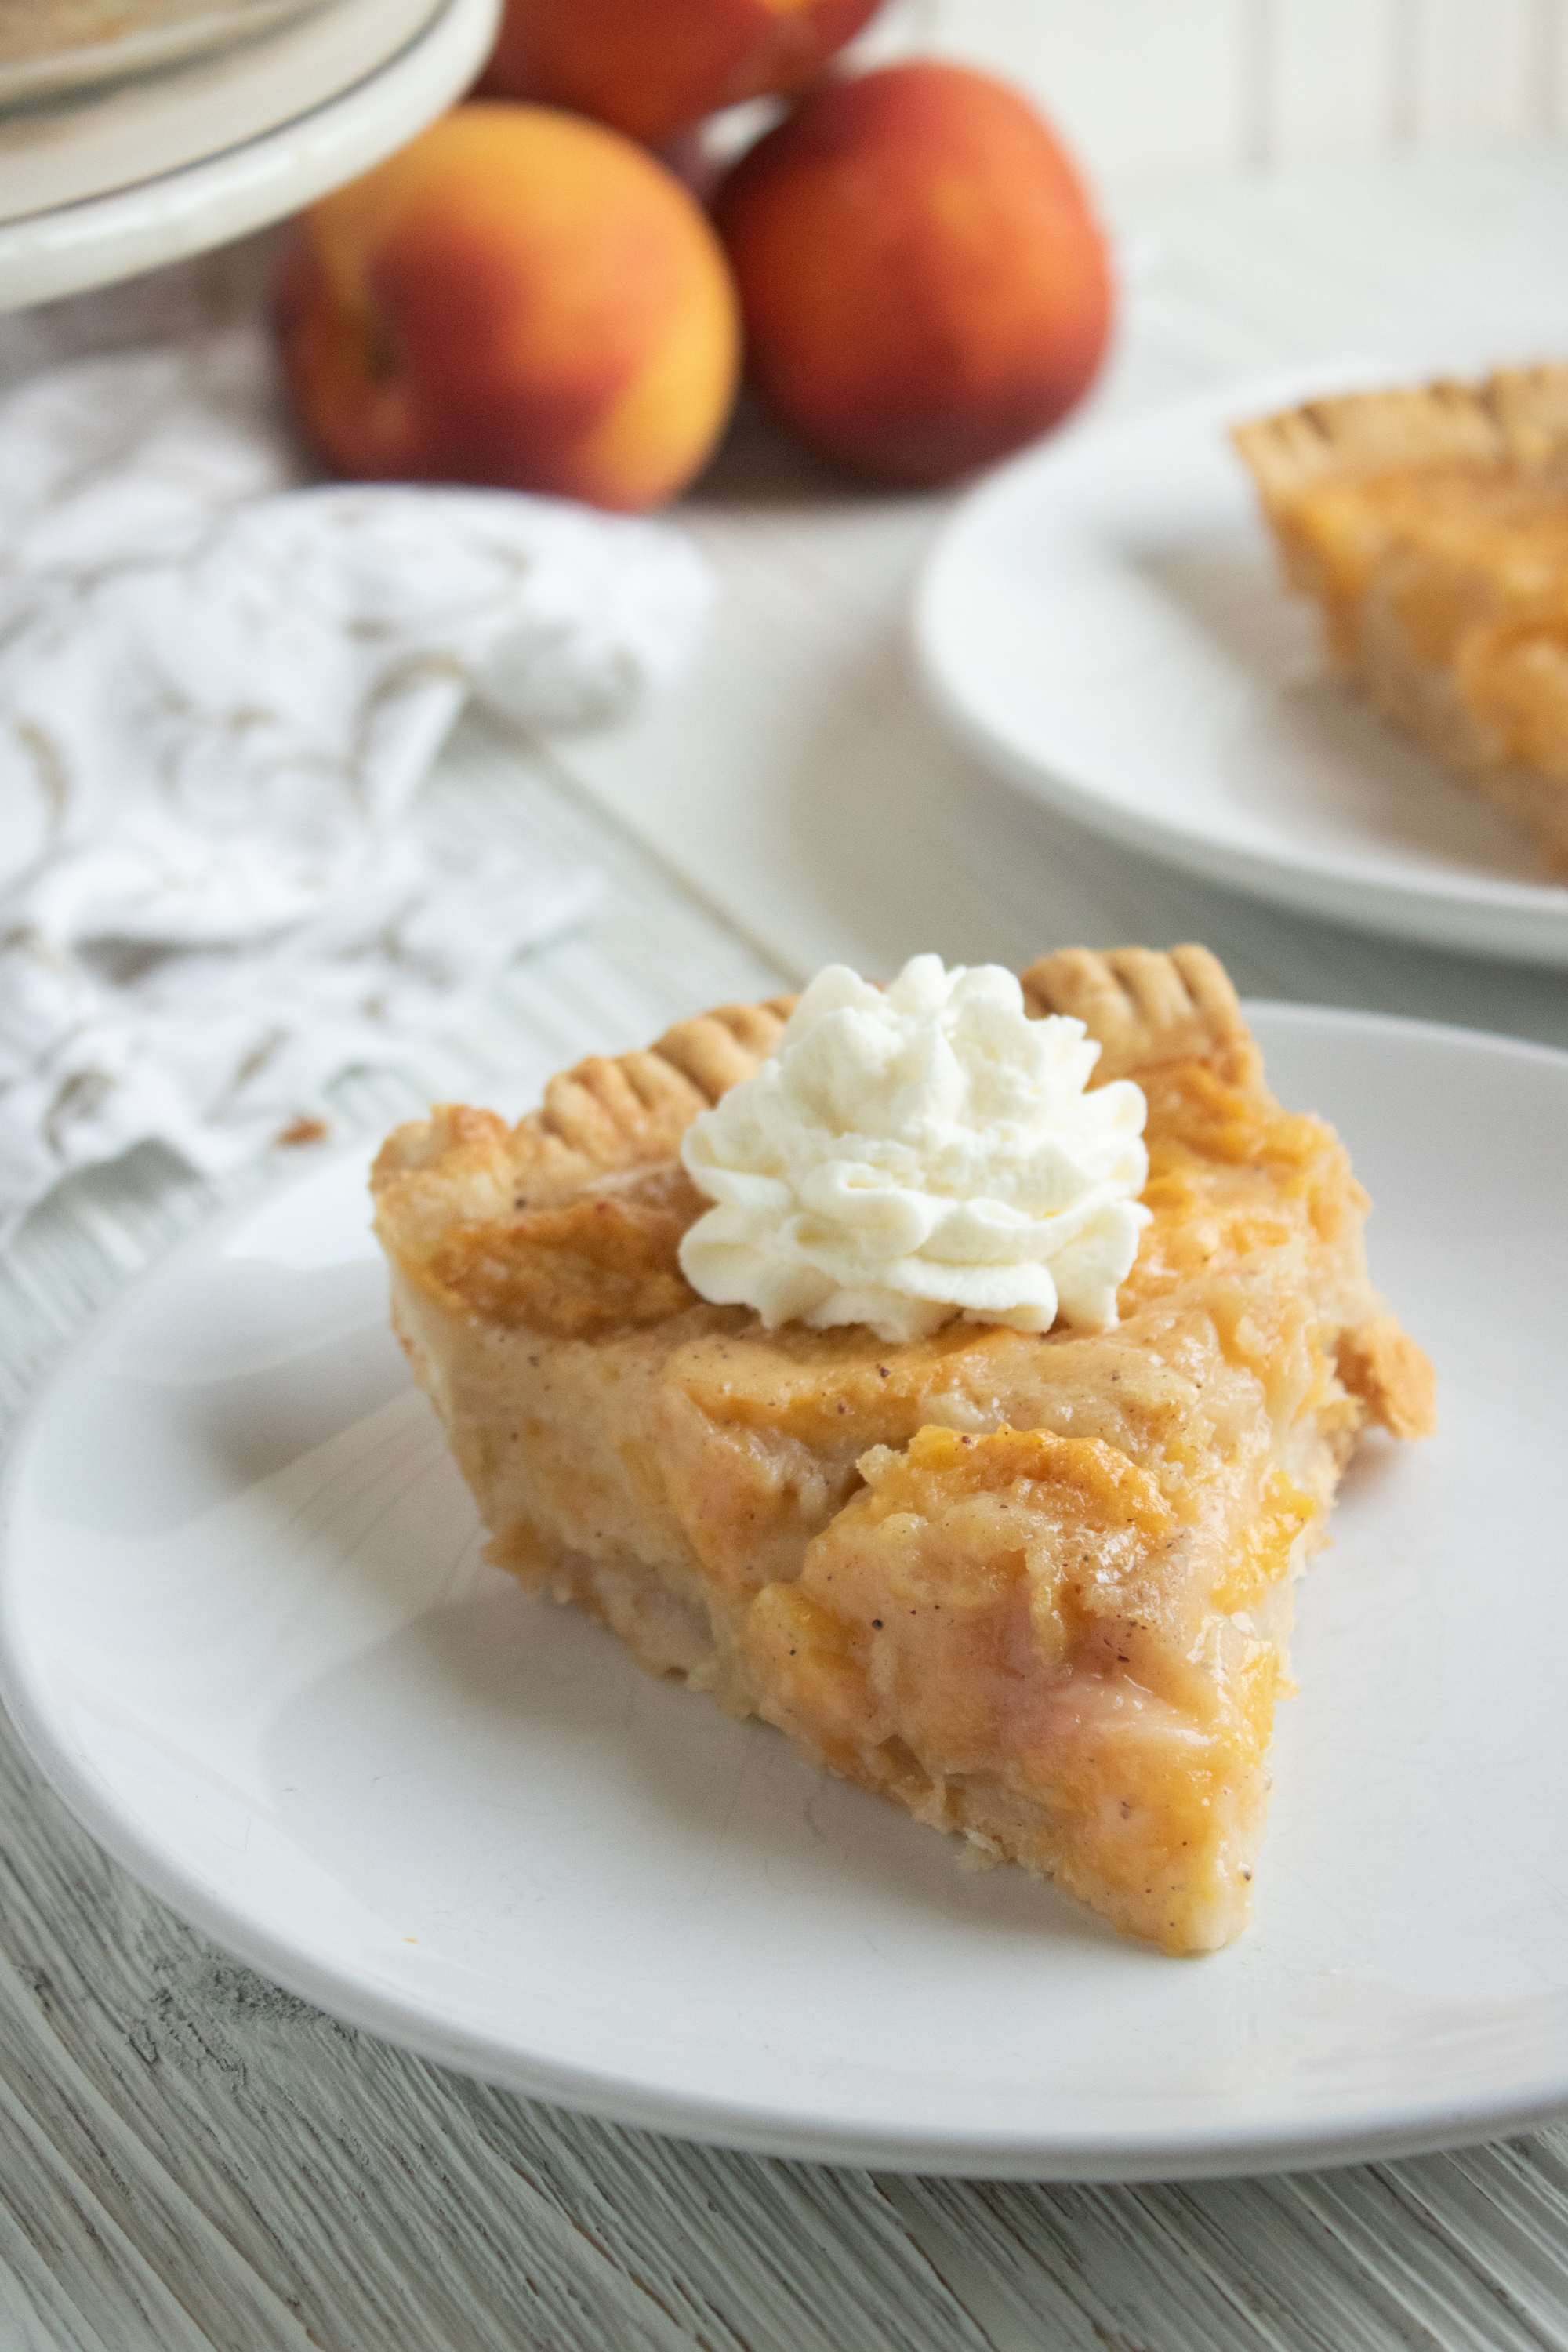 Peach Pie Recipe - An Easy and Delicious Dessert You'll Love